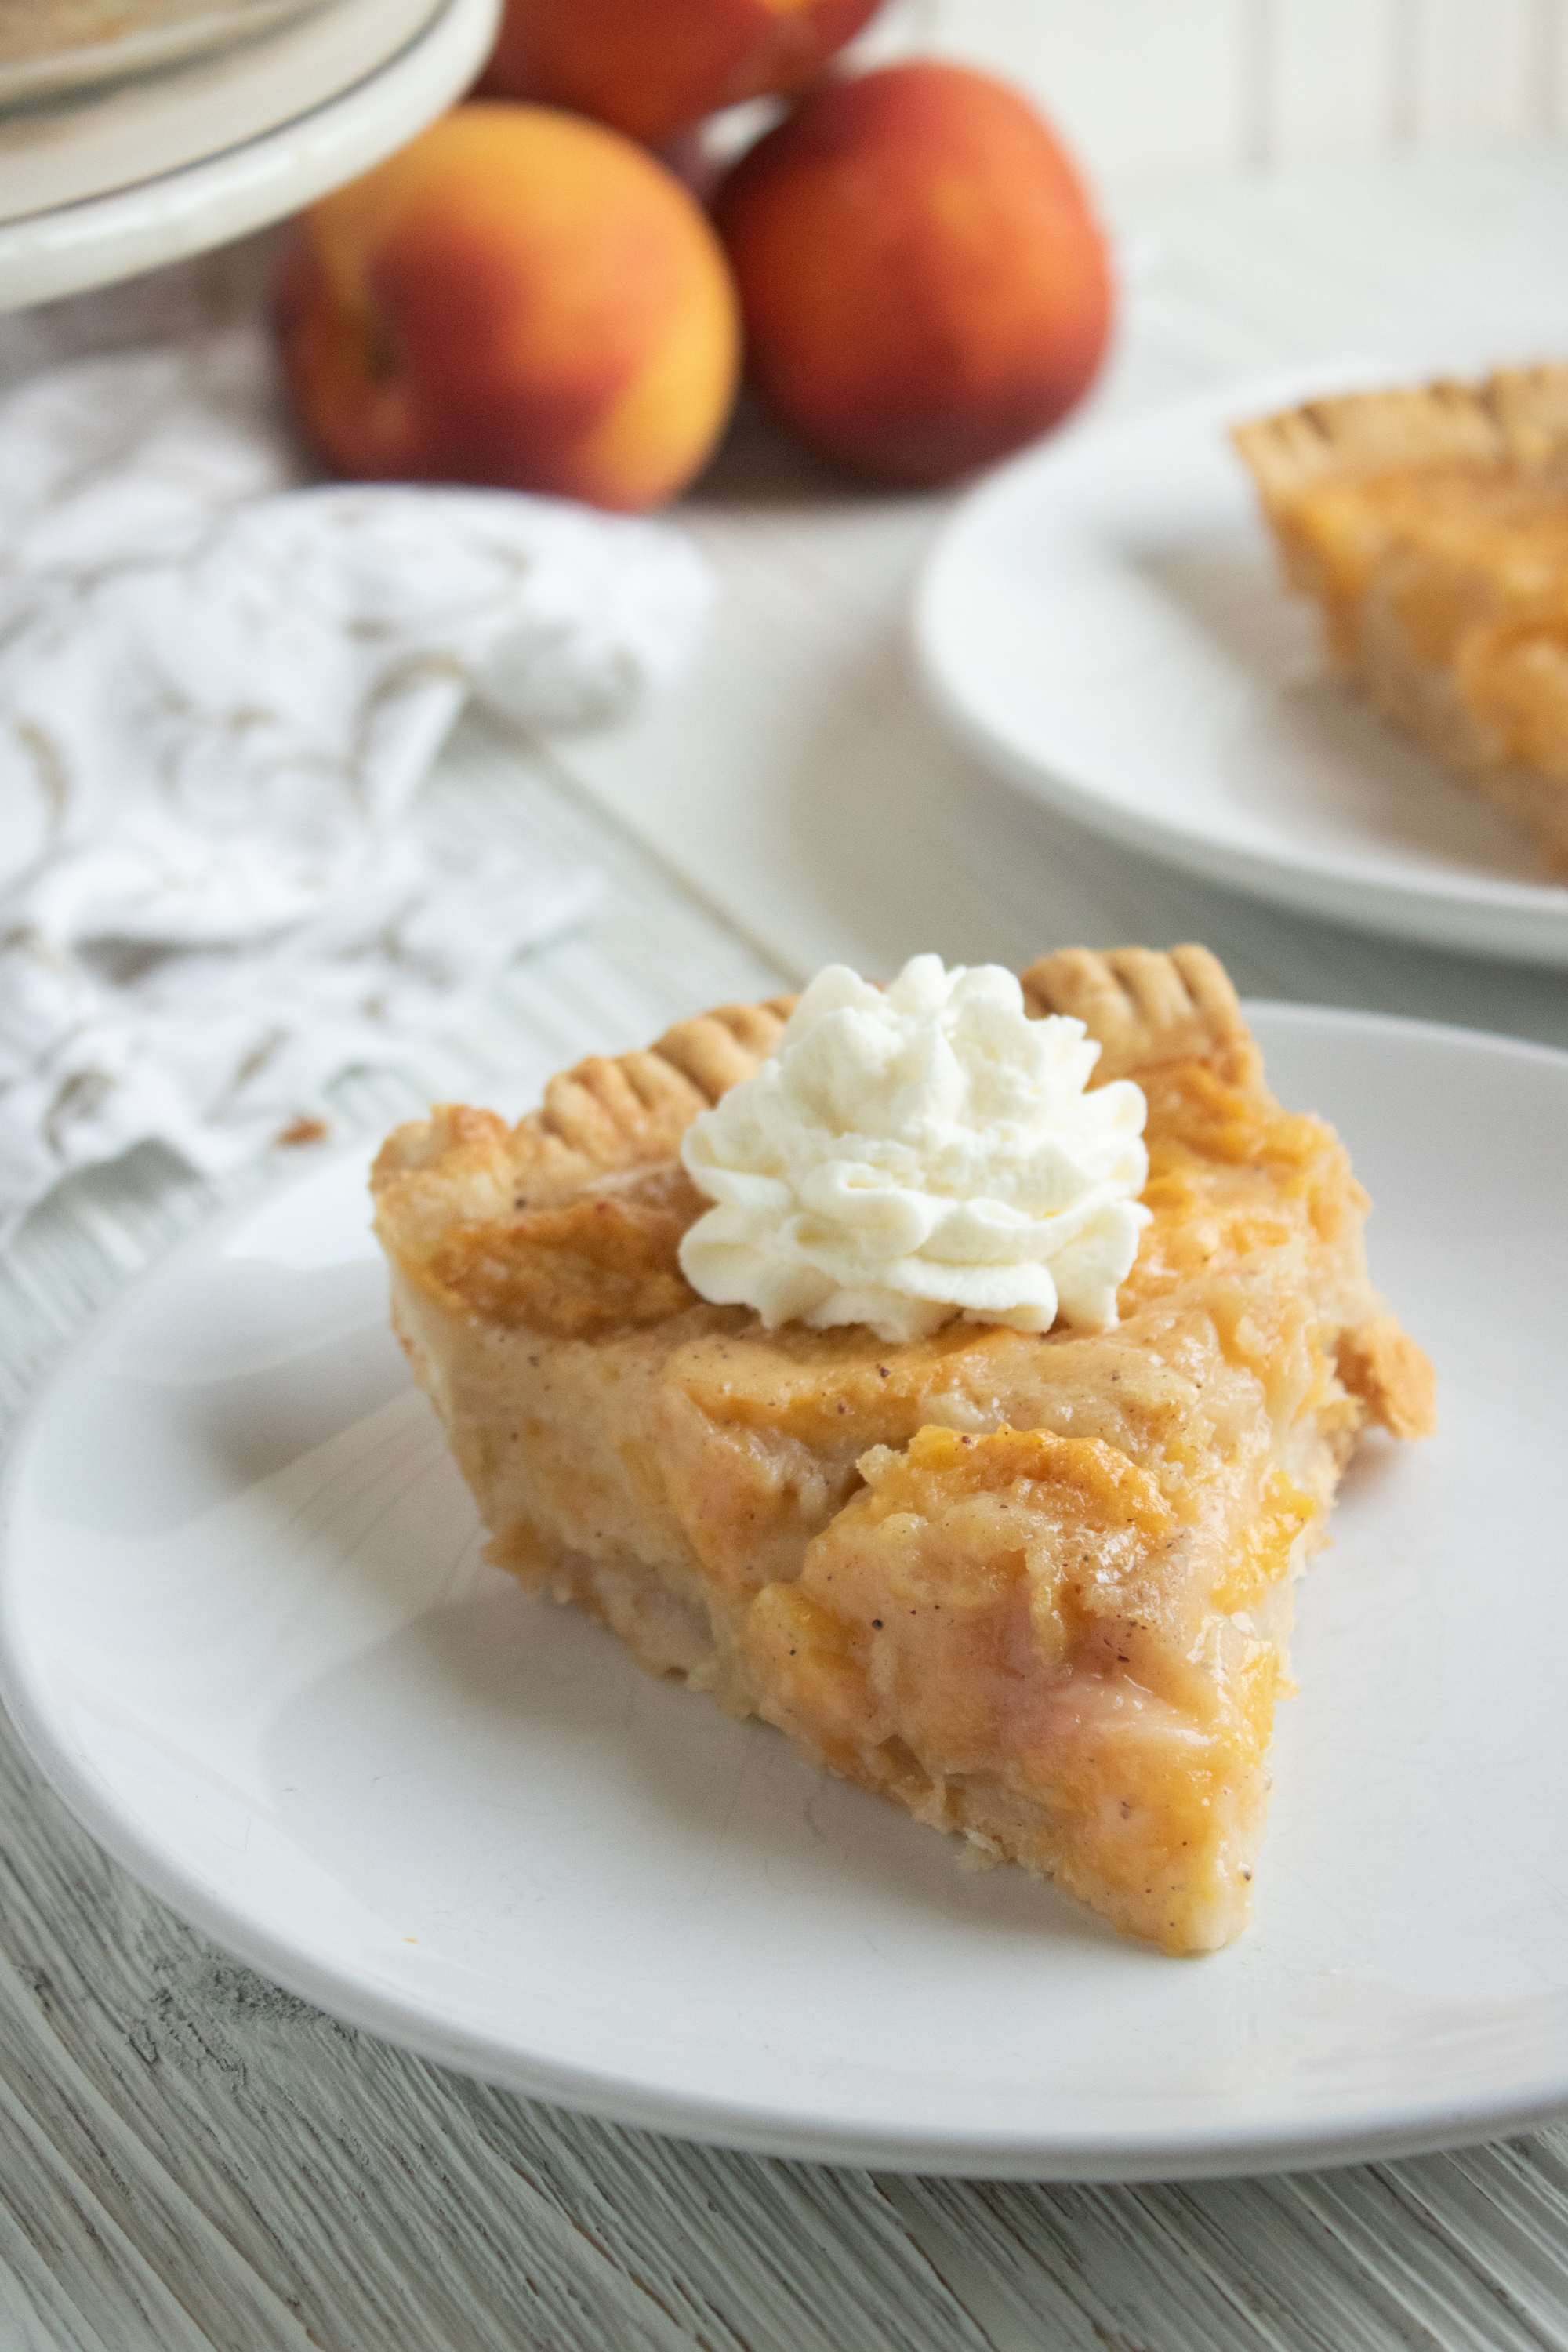 Peach Pie Recipe - An Easy and Delicious Dessert You'll Love